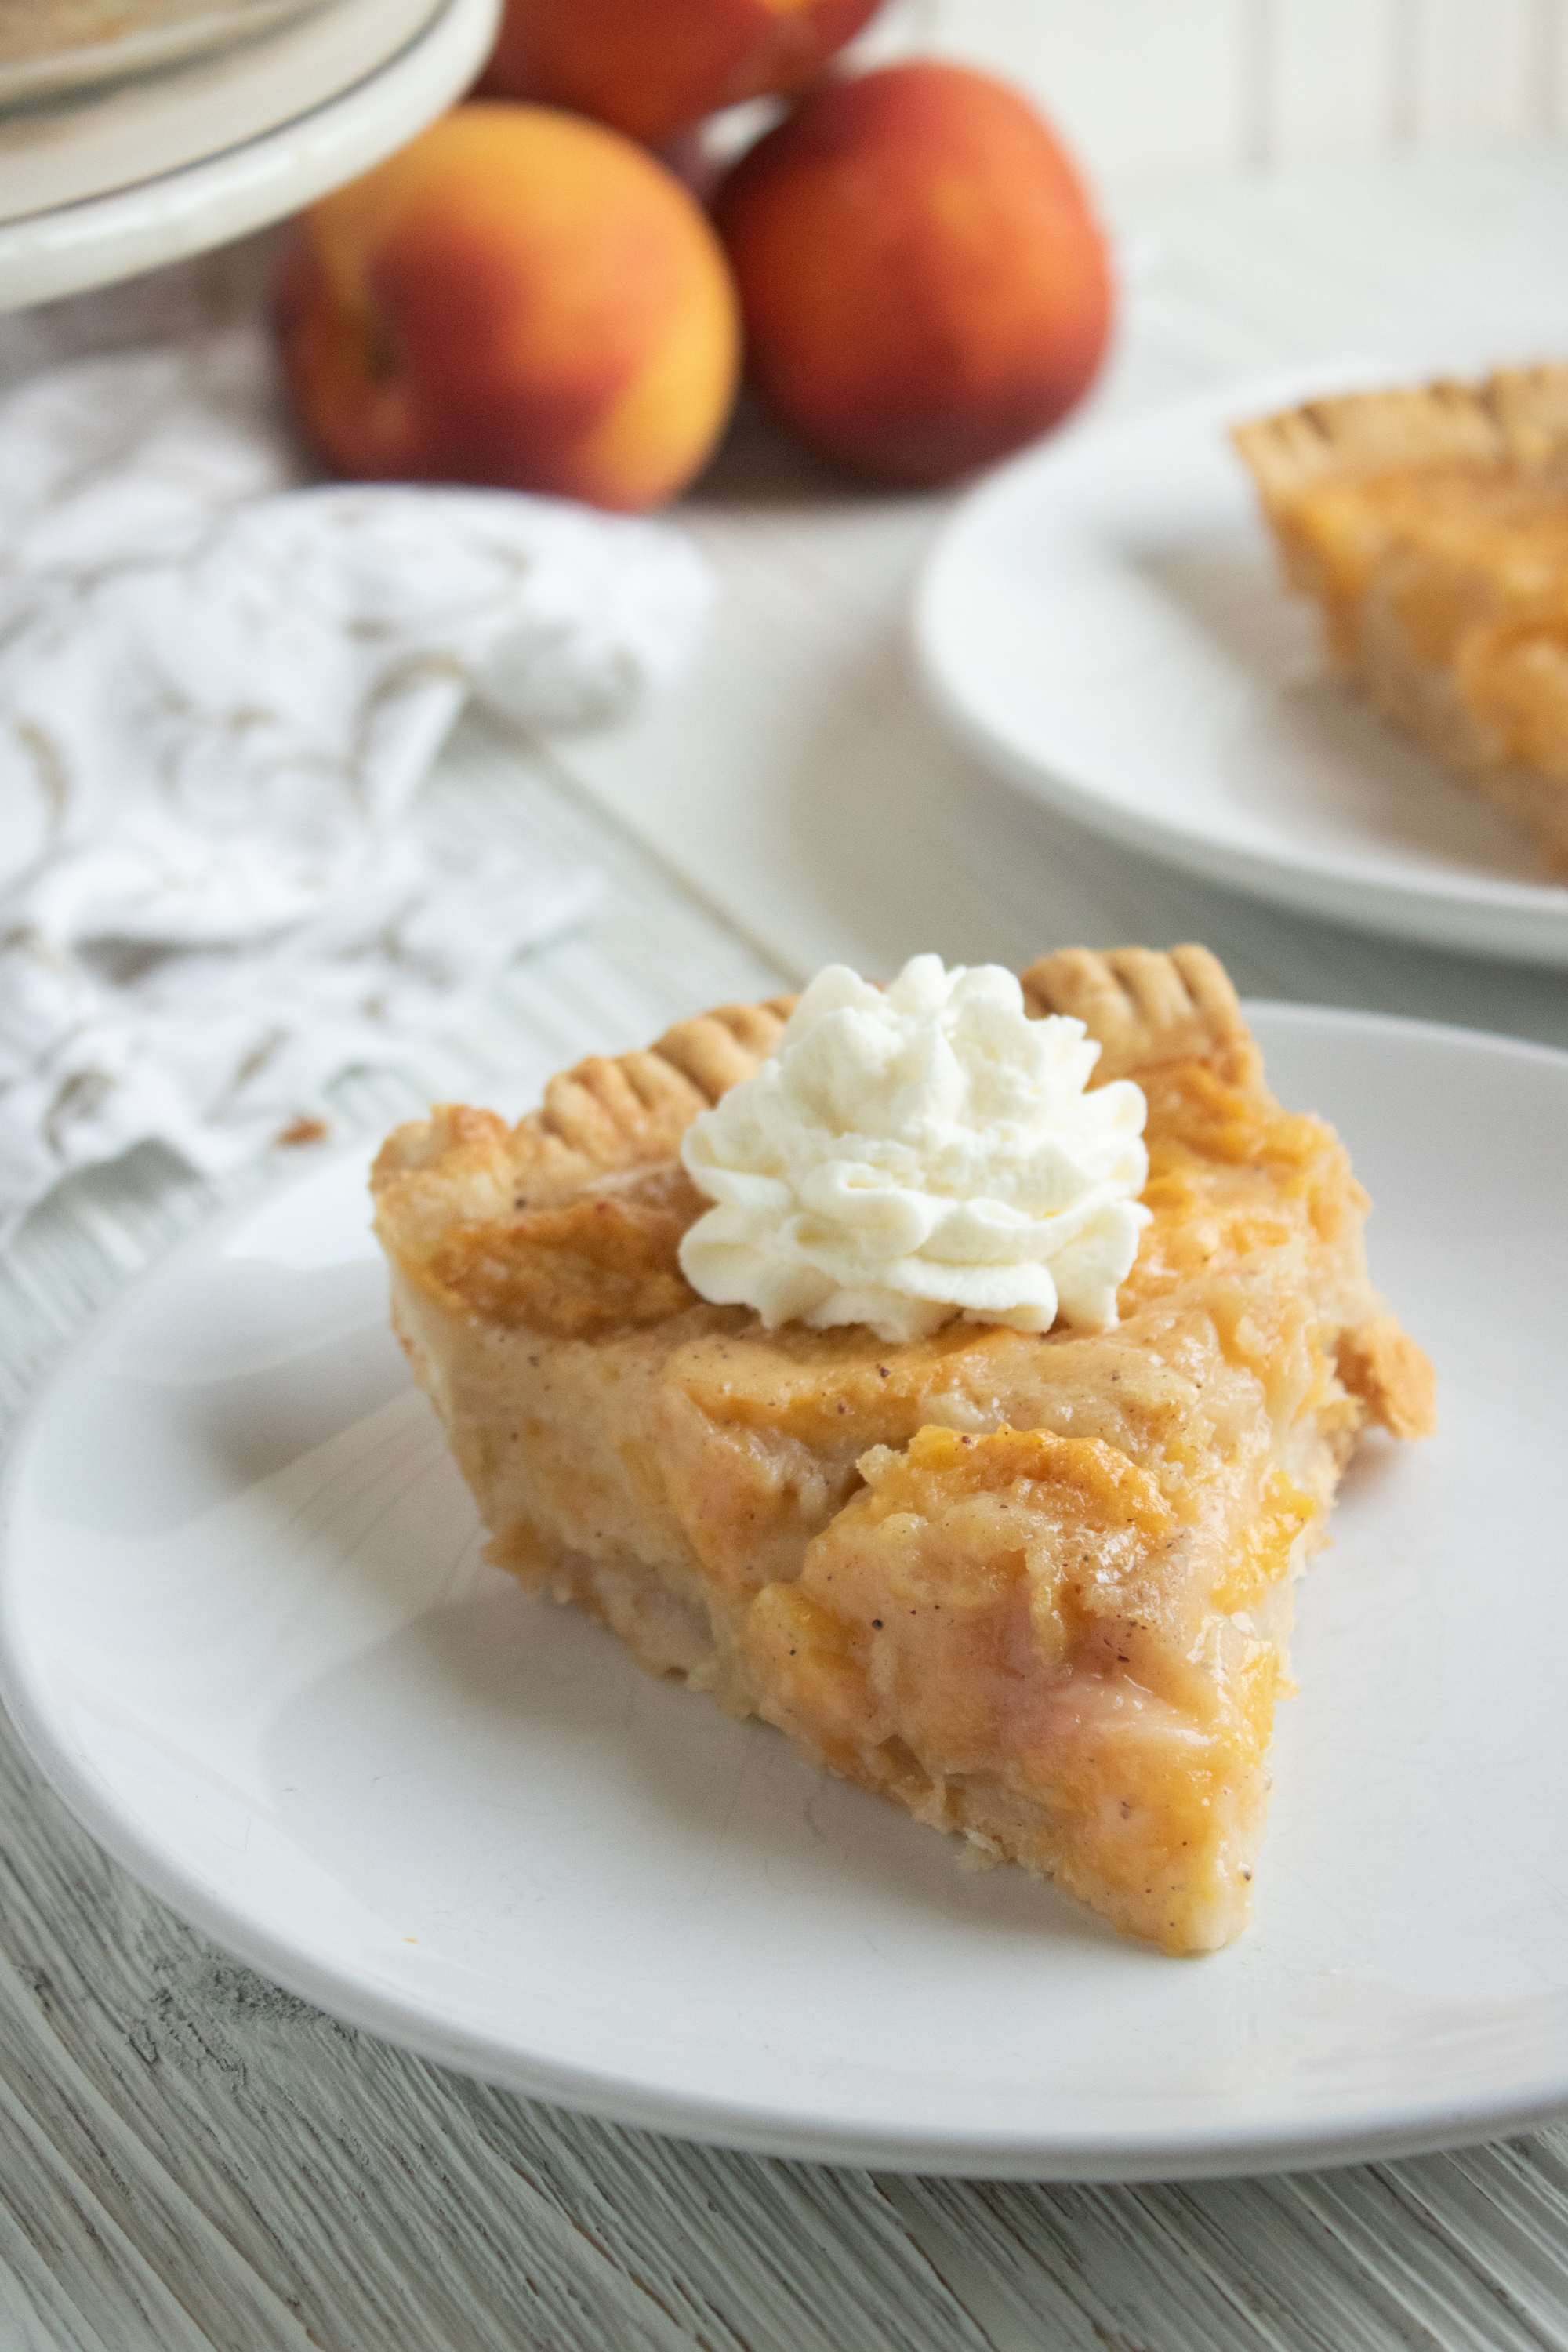 Peach Pie Recipe - An Easy and Delicious Dessert You'll Love